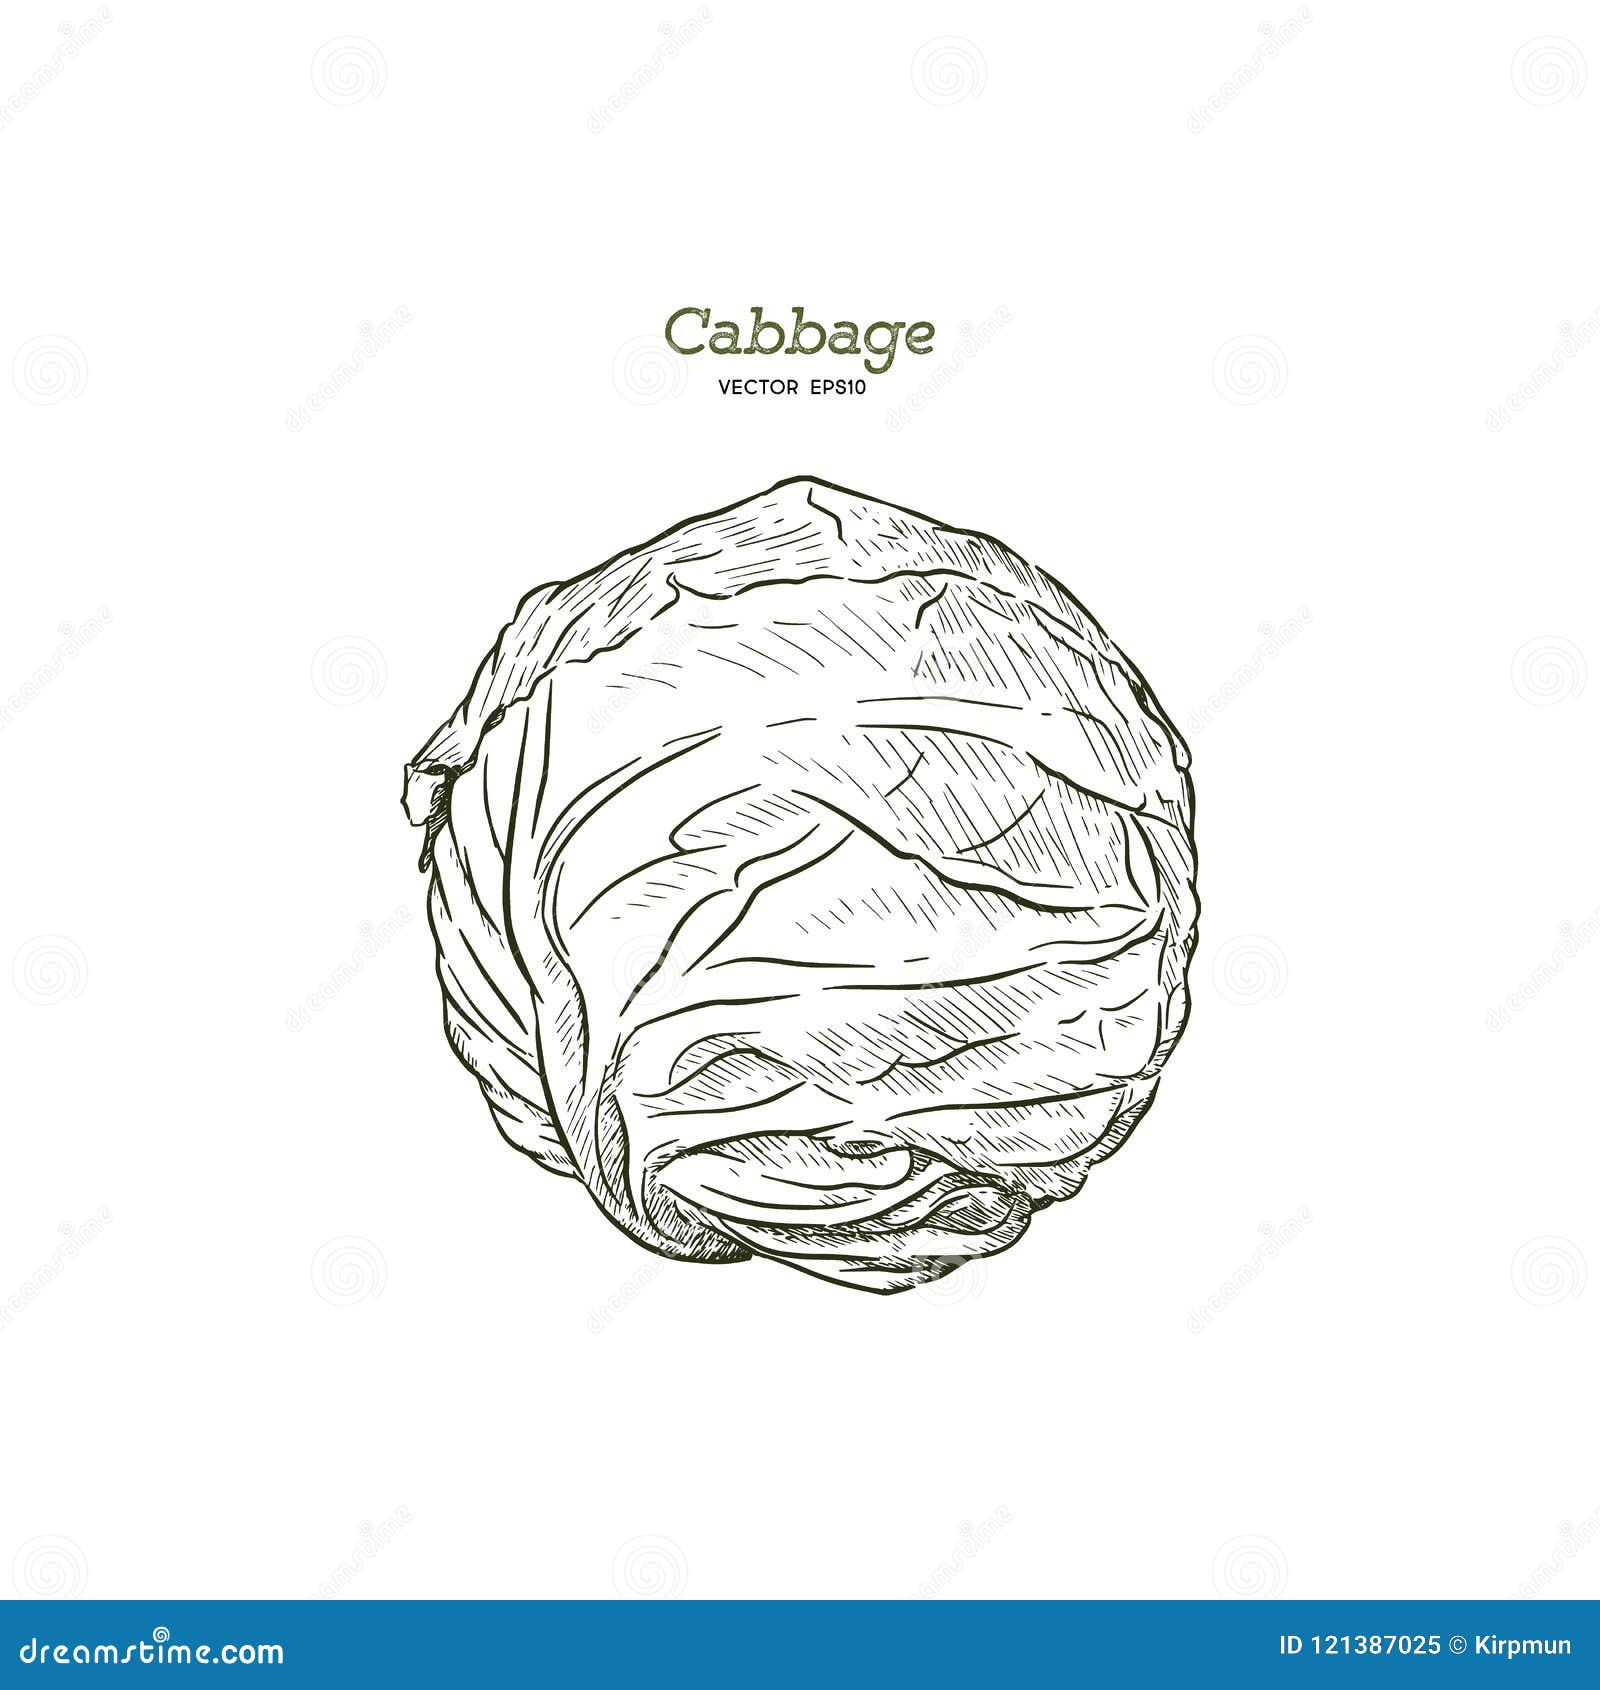 HOW TO DRAW CABBAGE  Easy  Cute Cabbage Drawing Tutorial For Beginner   Kids  YouTube